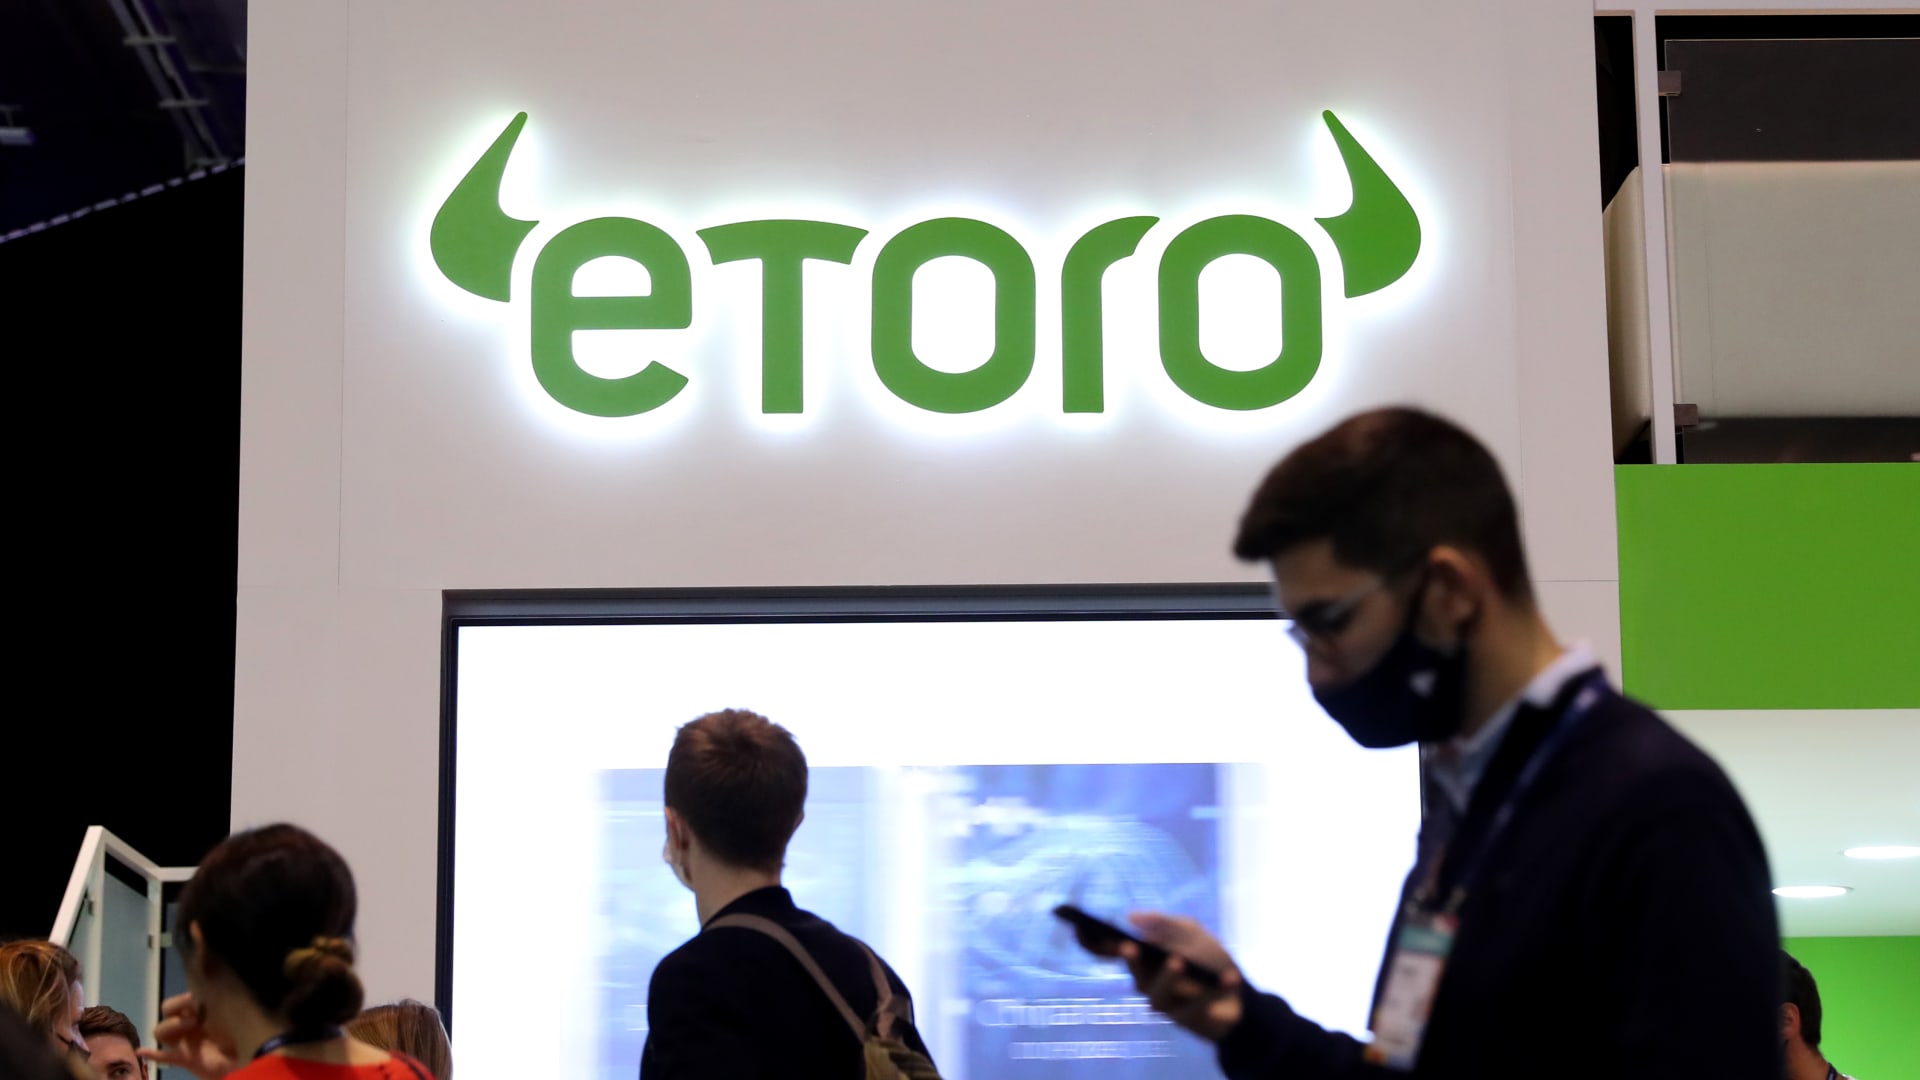 &#x27We certainly are eyeing the public markets&#x27: eToro CEO considers IPO immediately after scrapped SPAC deal